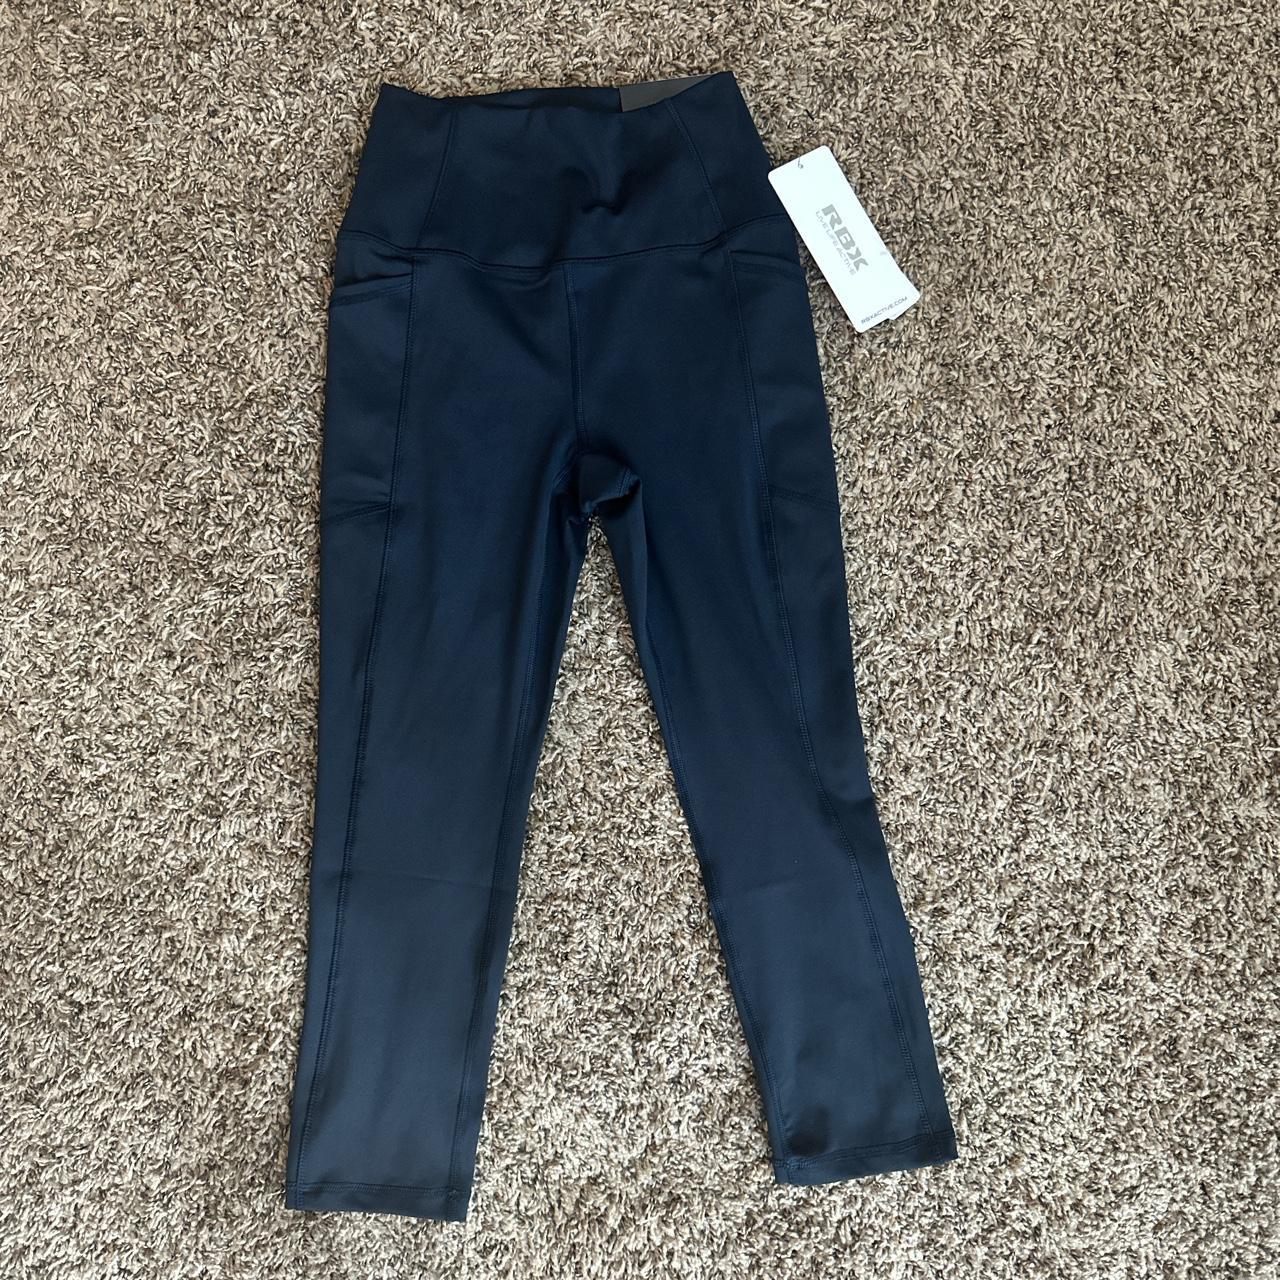 NWT RBX Active High Waisted Squat Proof Workout Yoga - Depop